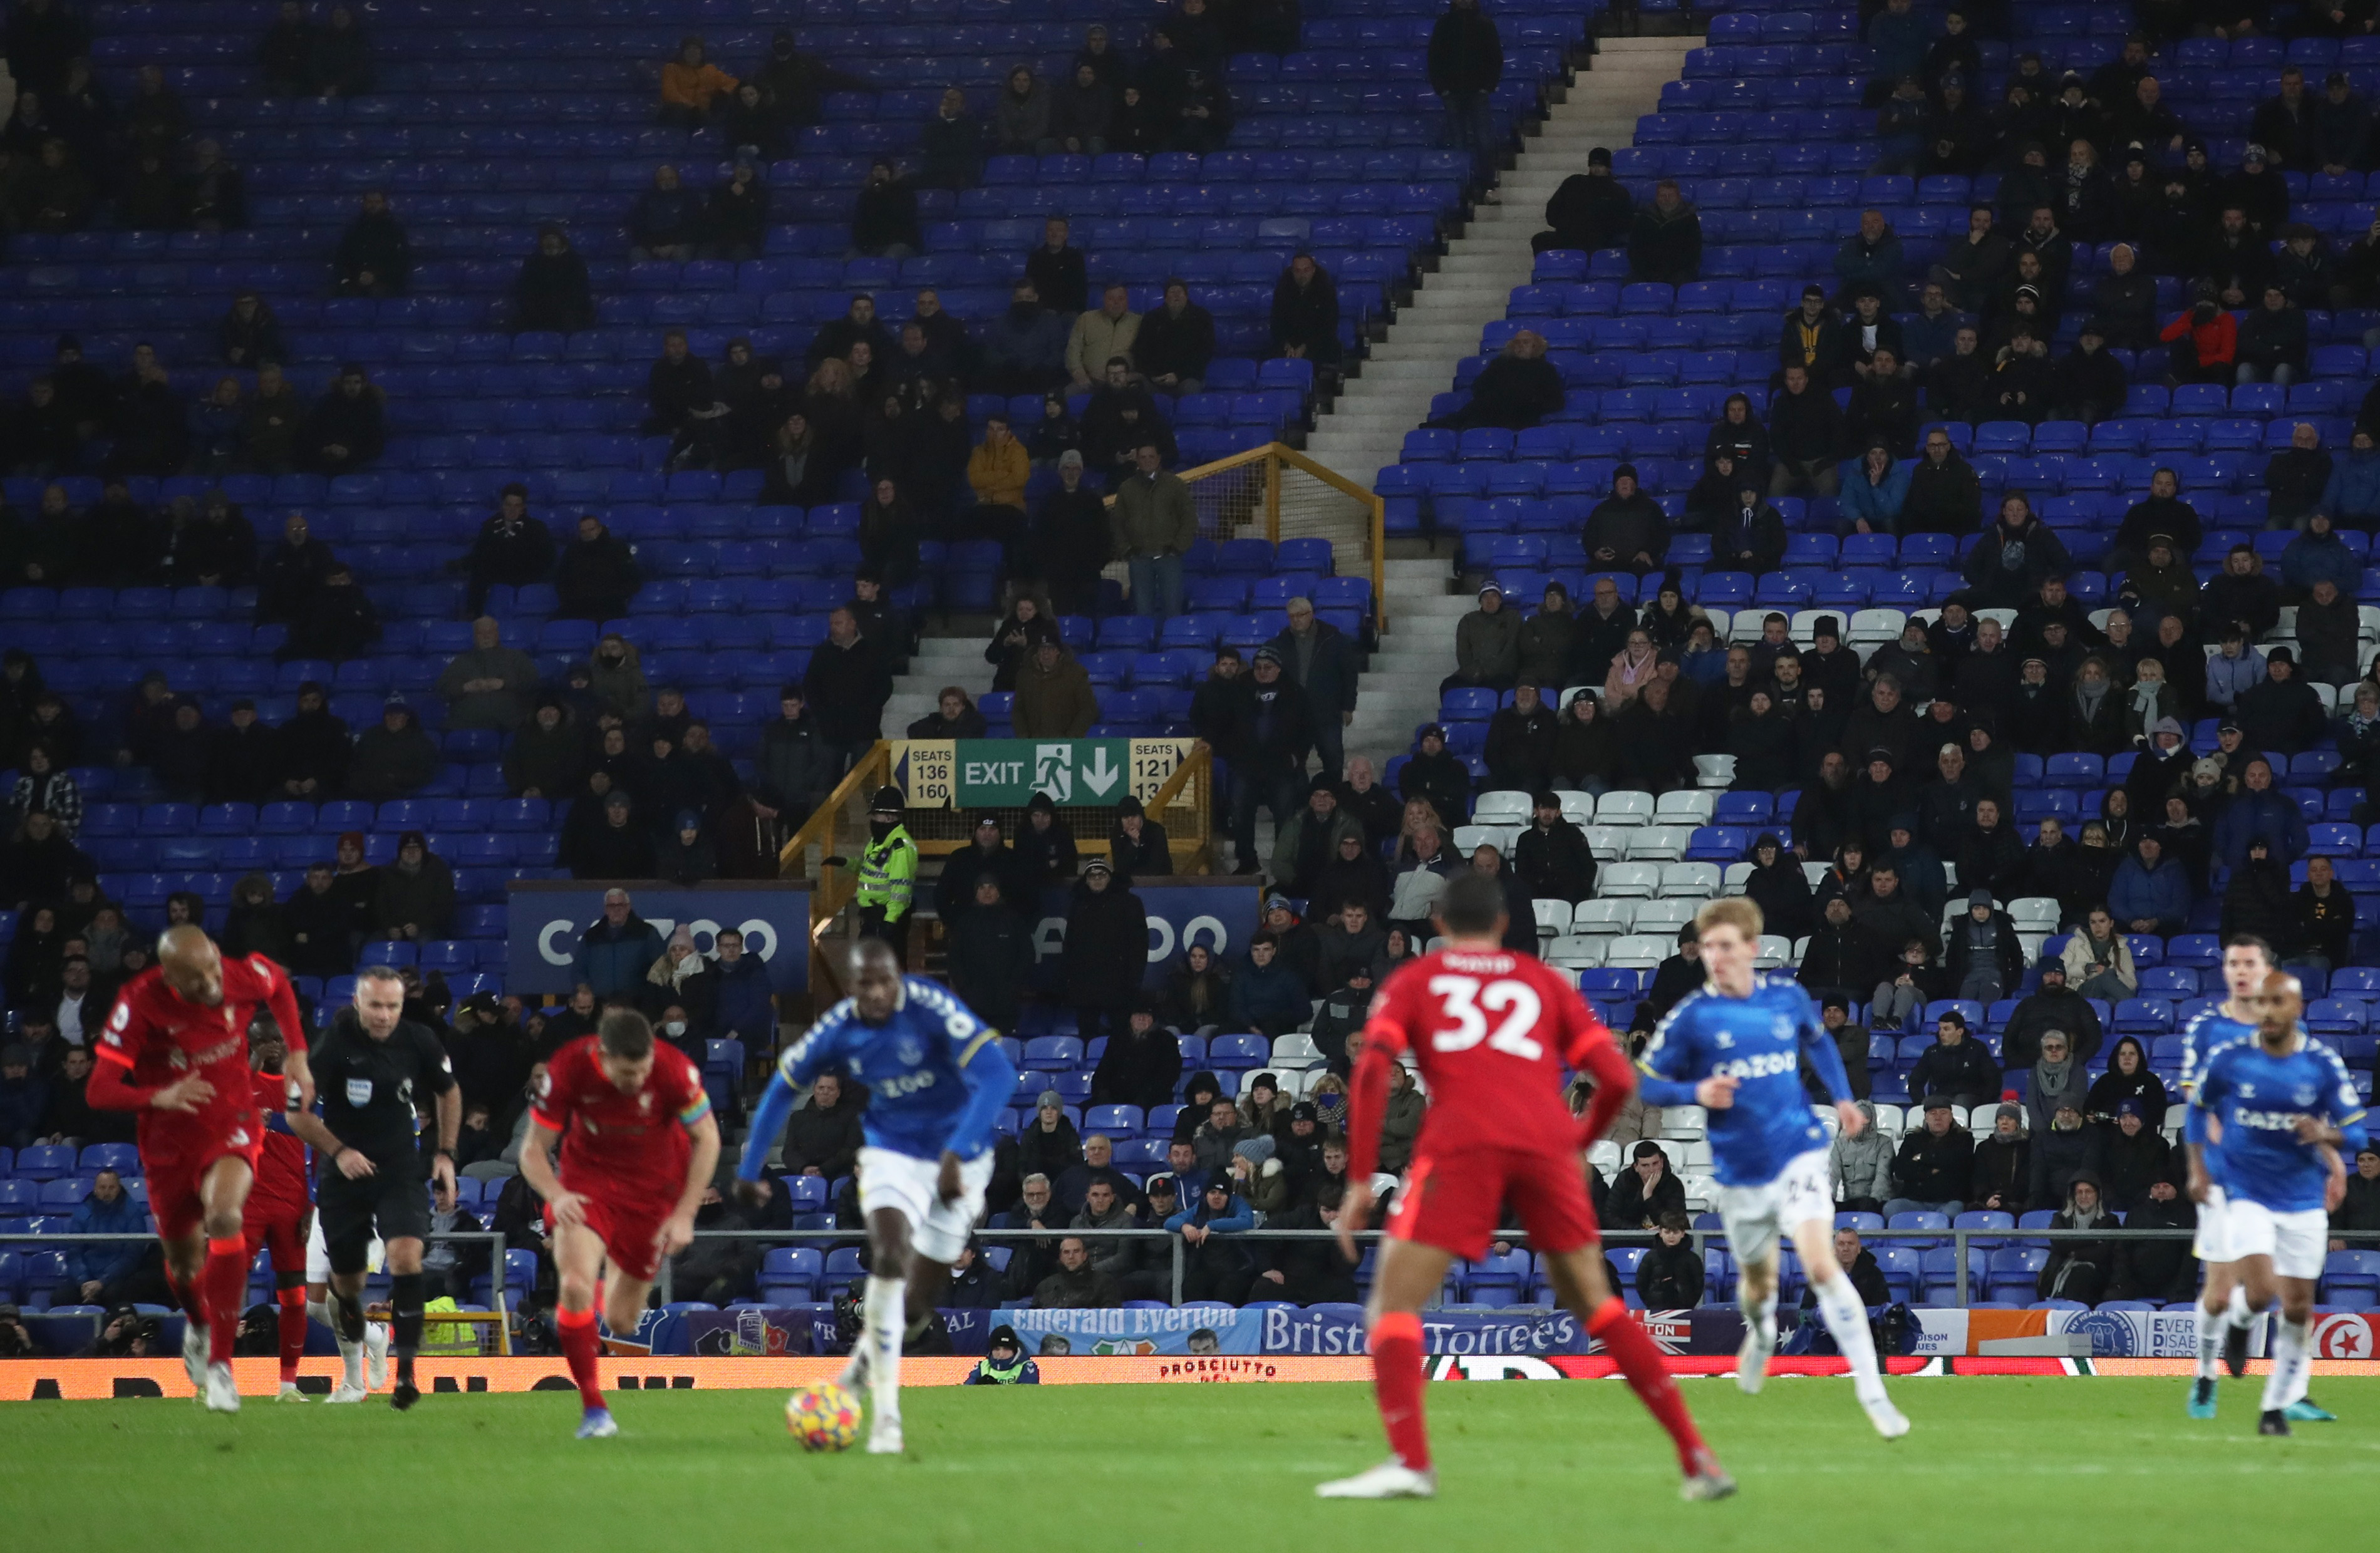 Soccer Football - Premier League - Everton v Liverpool - Goodison Park, Liverpool, Britain - December 1, 2021 General view of empty seats in the stands during the match Action Images via Reuters/Carl Recine